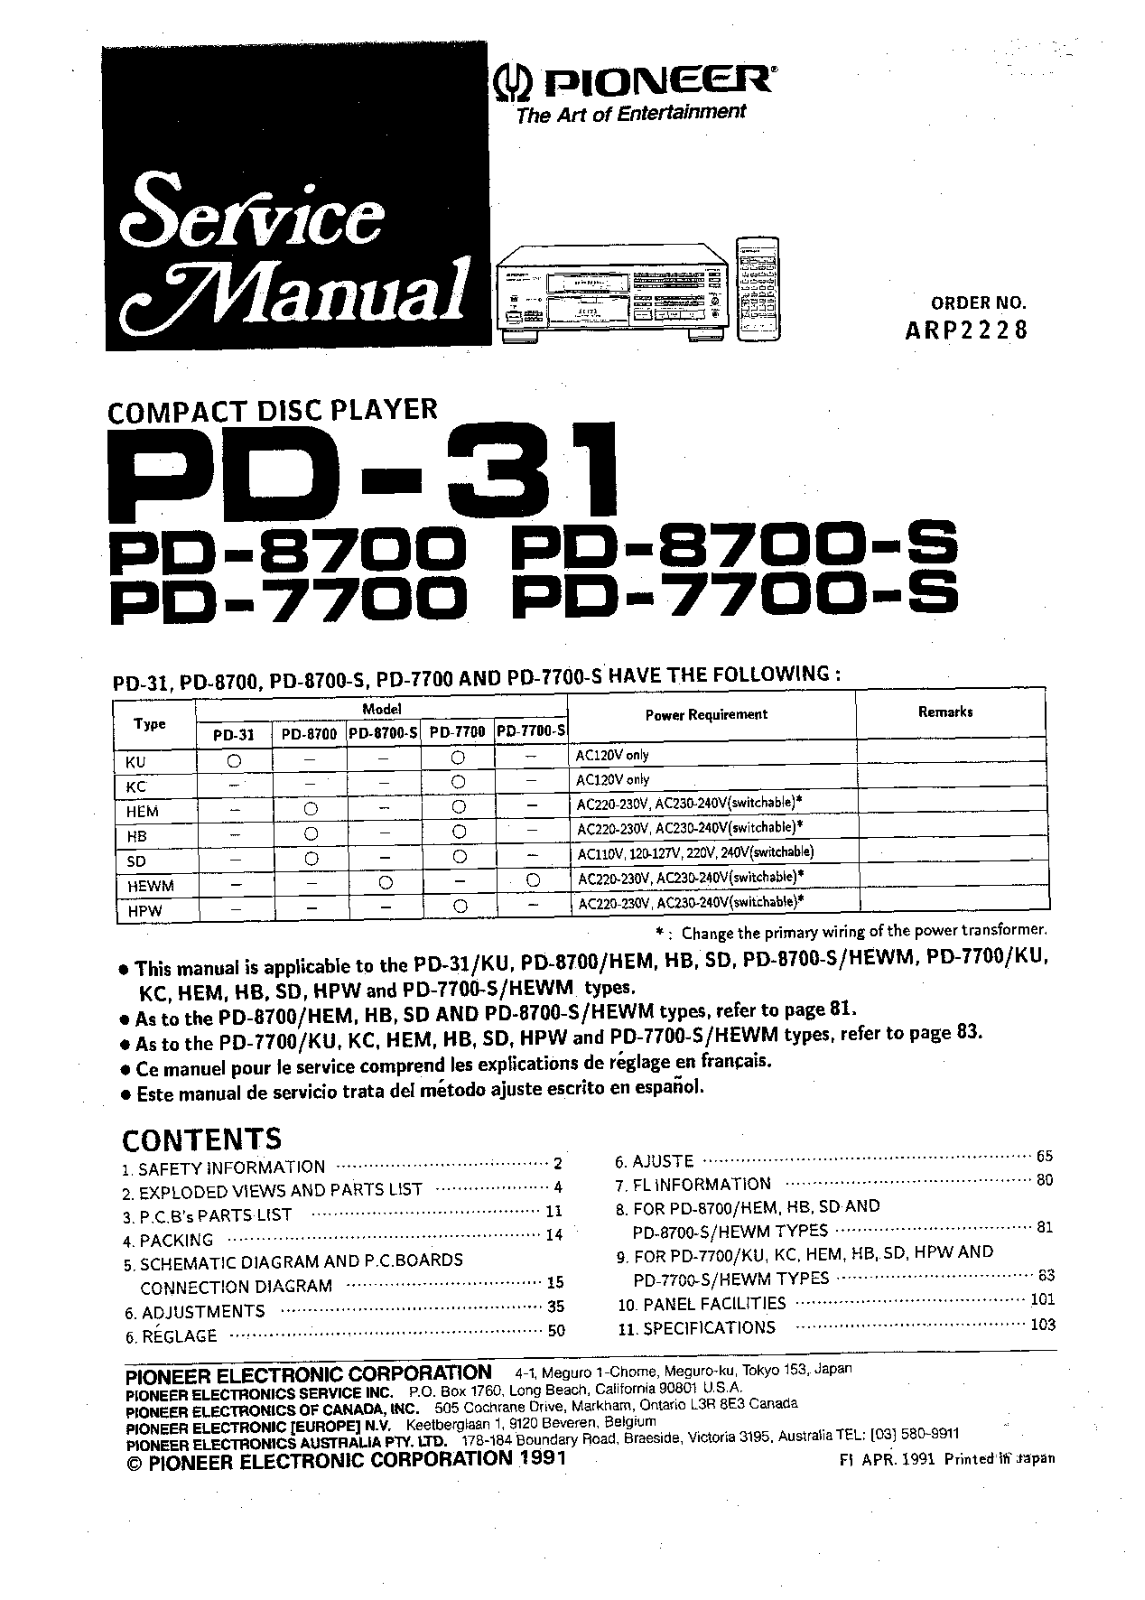 Pioneer PD-31, PD-7700 Service manual